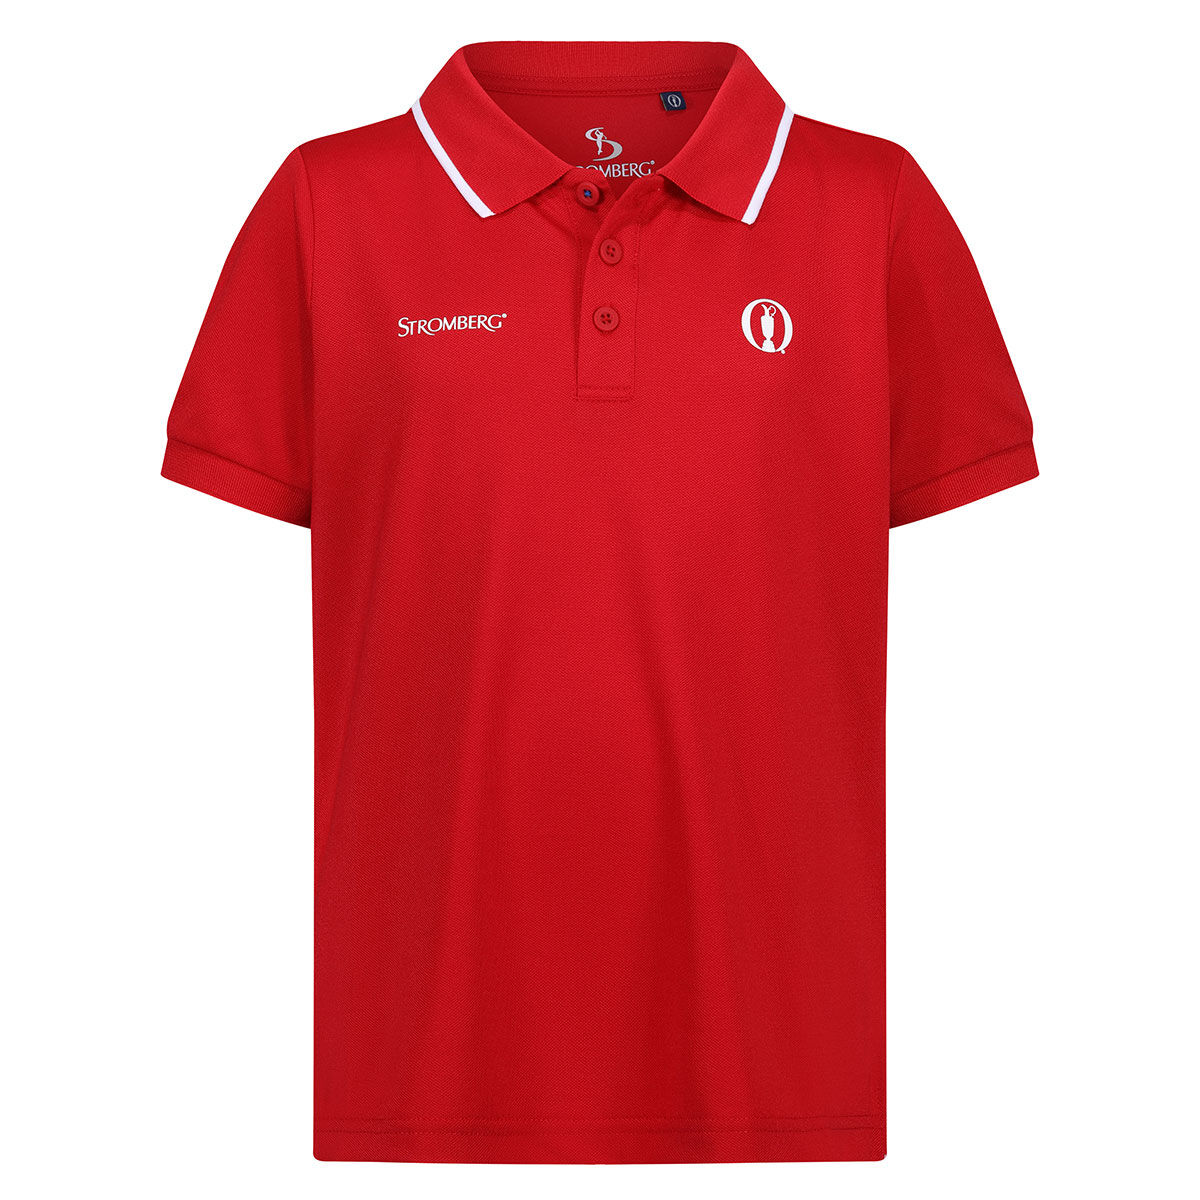 Stromberg Junior The Open Harbour Stretch Golf Polo Shirt, Unisex, Tango red, 10-11 years | American Golf